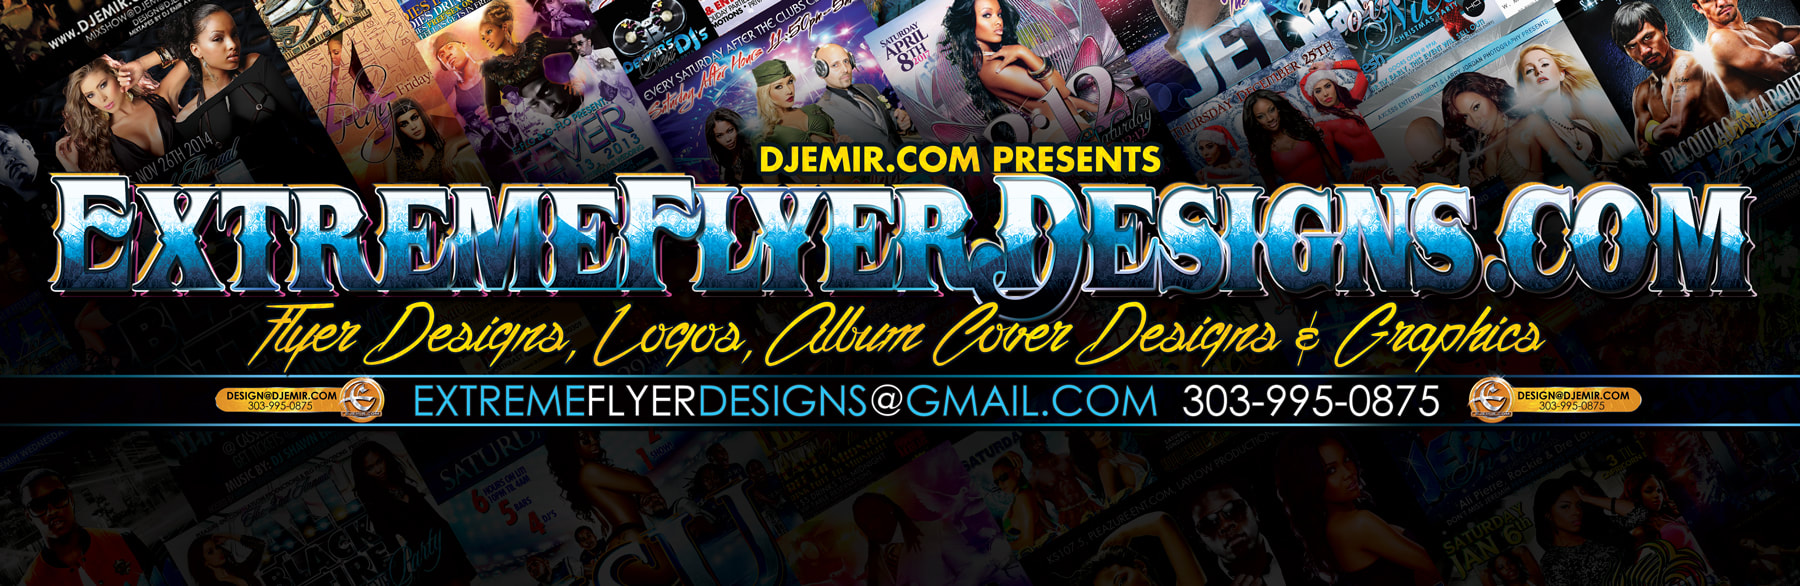 Extreme Flyer designs Graphic Designs and Logos Header with Contact Information Email and Phone Number as well as various flyer design samples